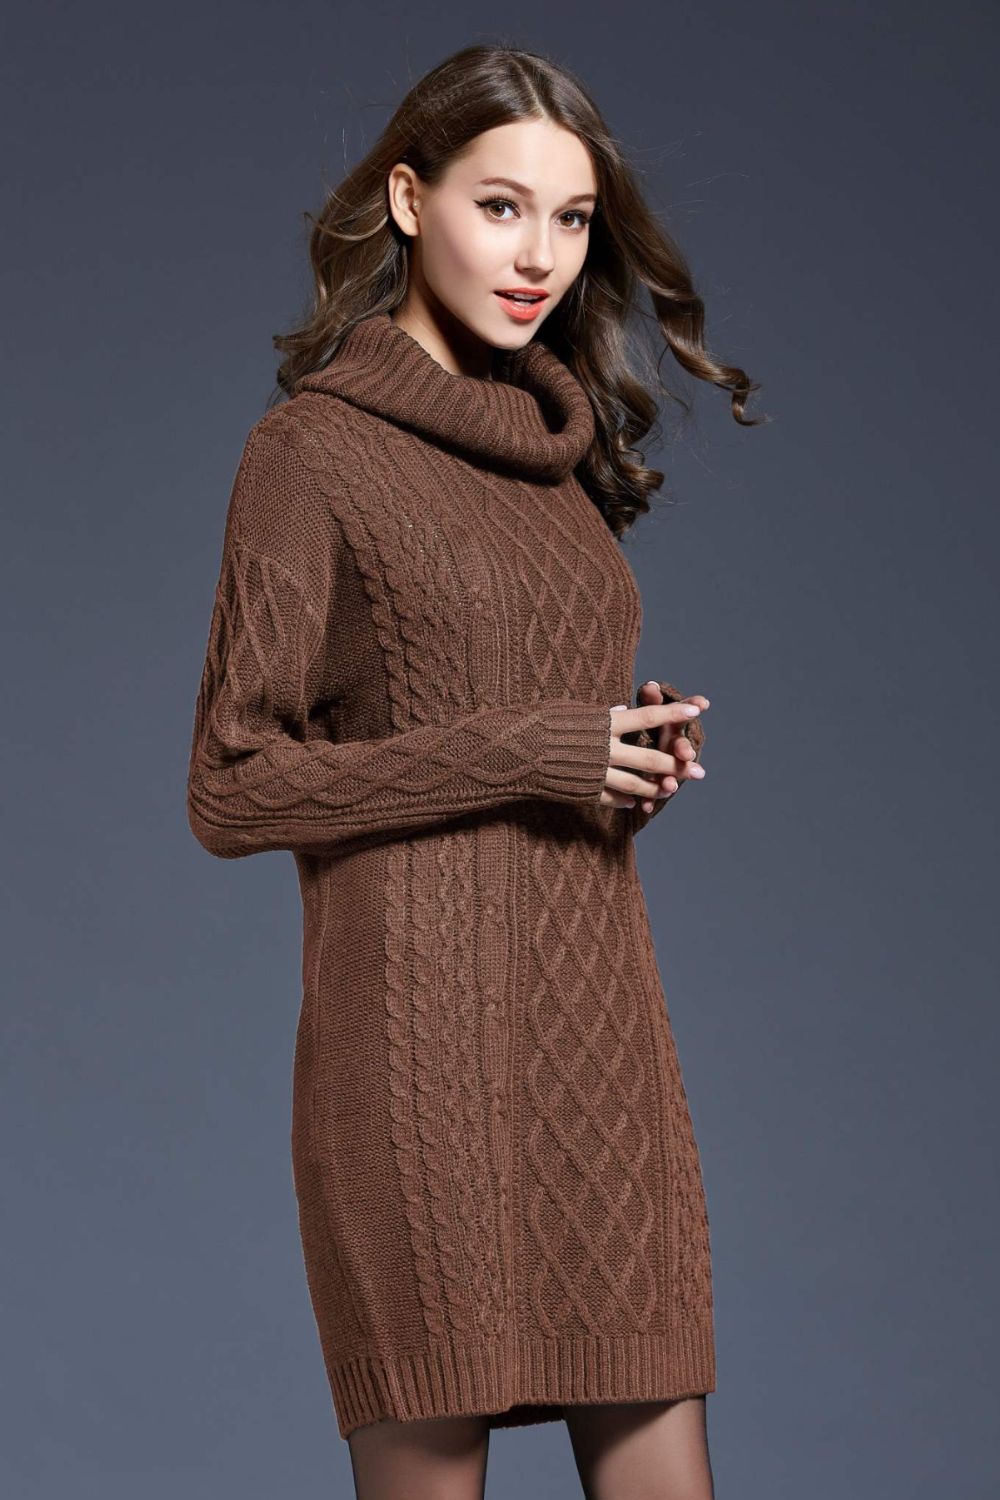 Women’s Full Size Mixed Knit Cowl Neck Dropped Shoulder Sweater Dress